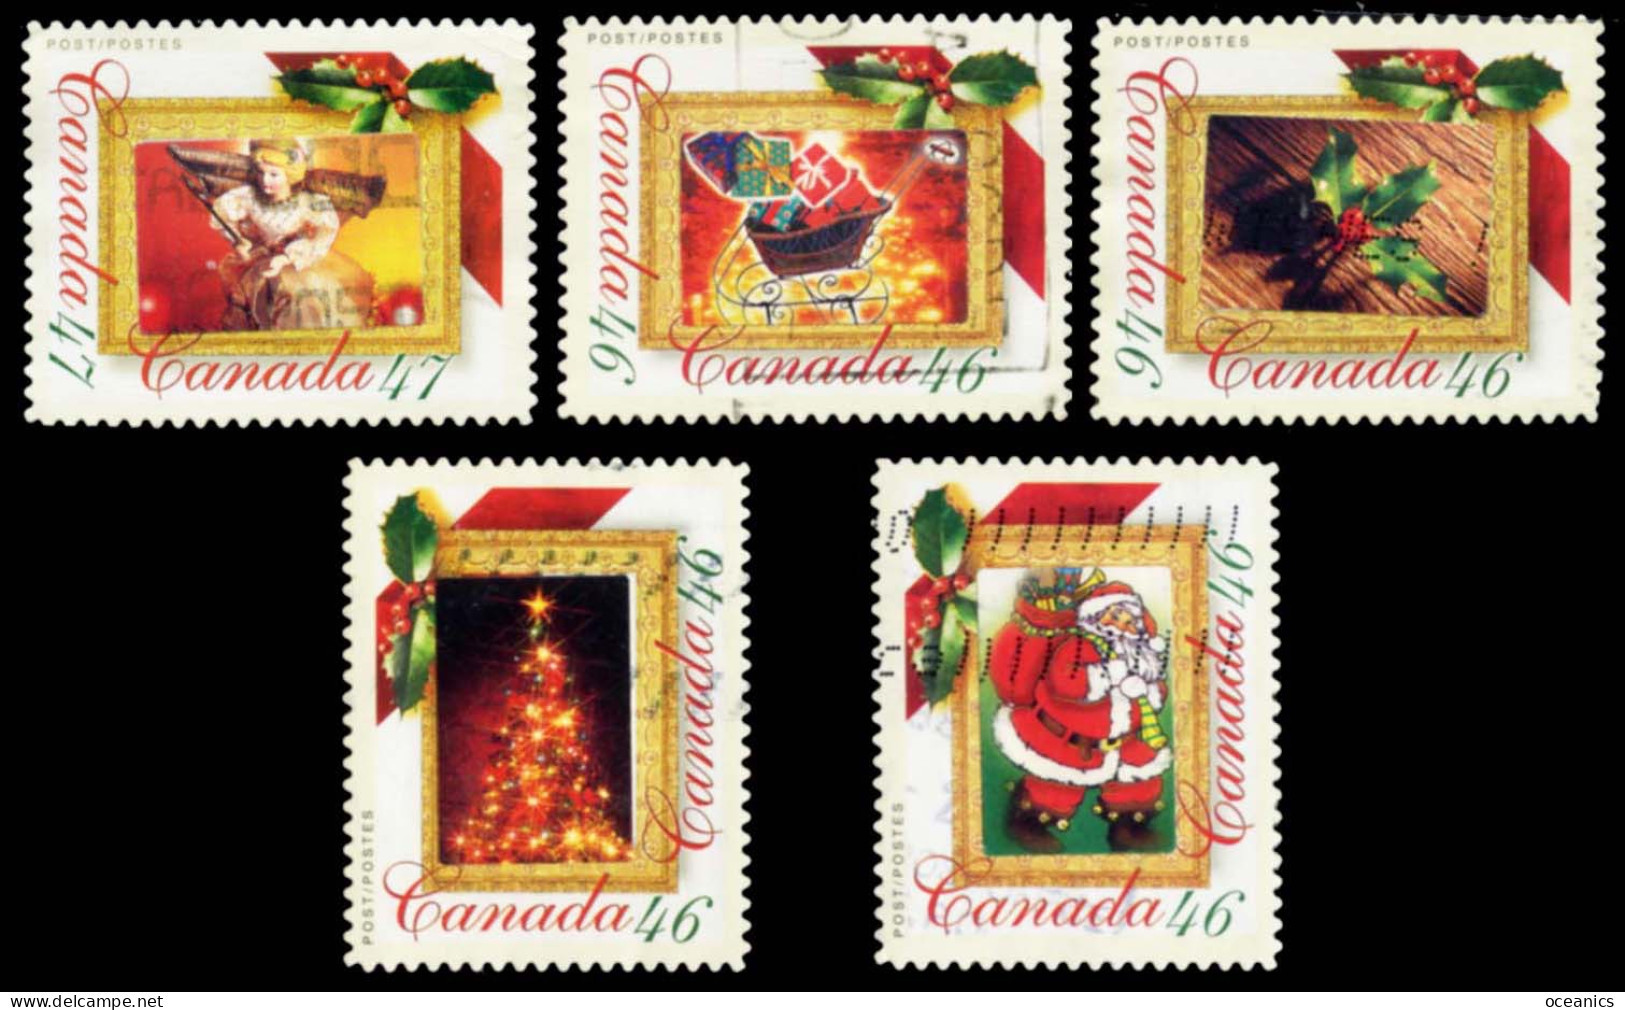 Canada (Scott No.1872 - Timbre Photo / Christmas / Picture Postage) (o) 5 DIFF. - Gebraucht